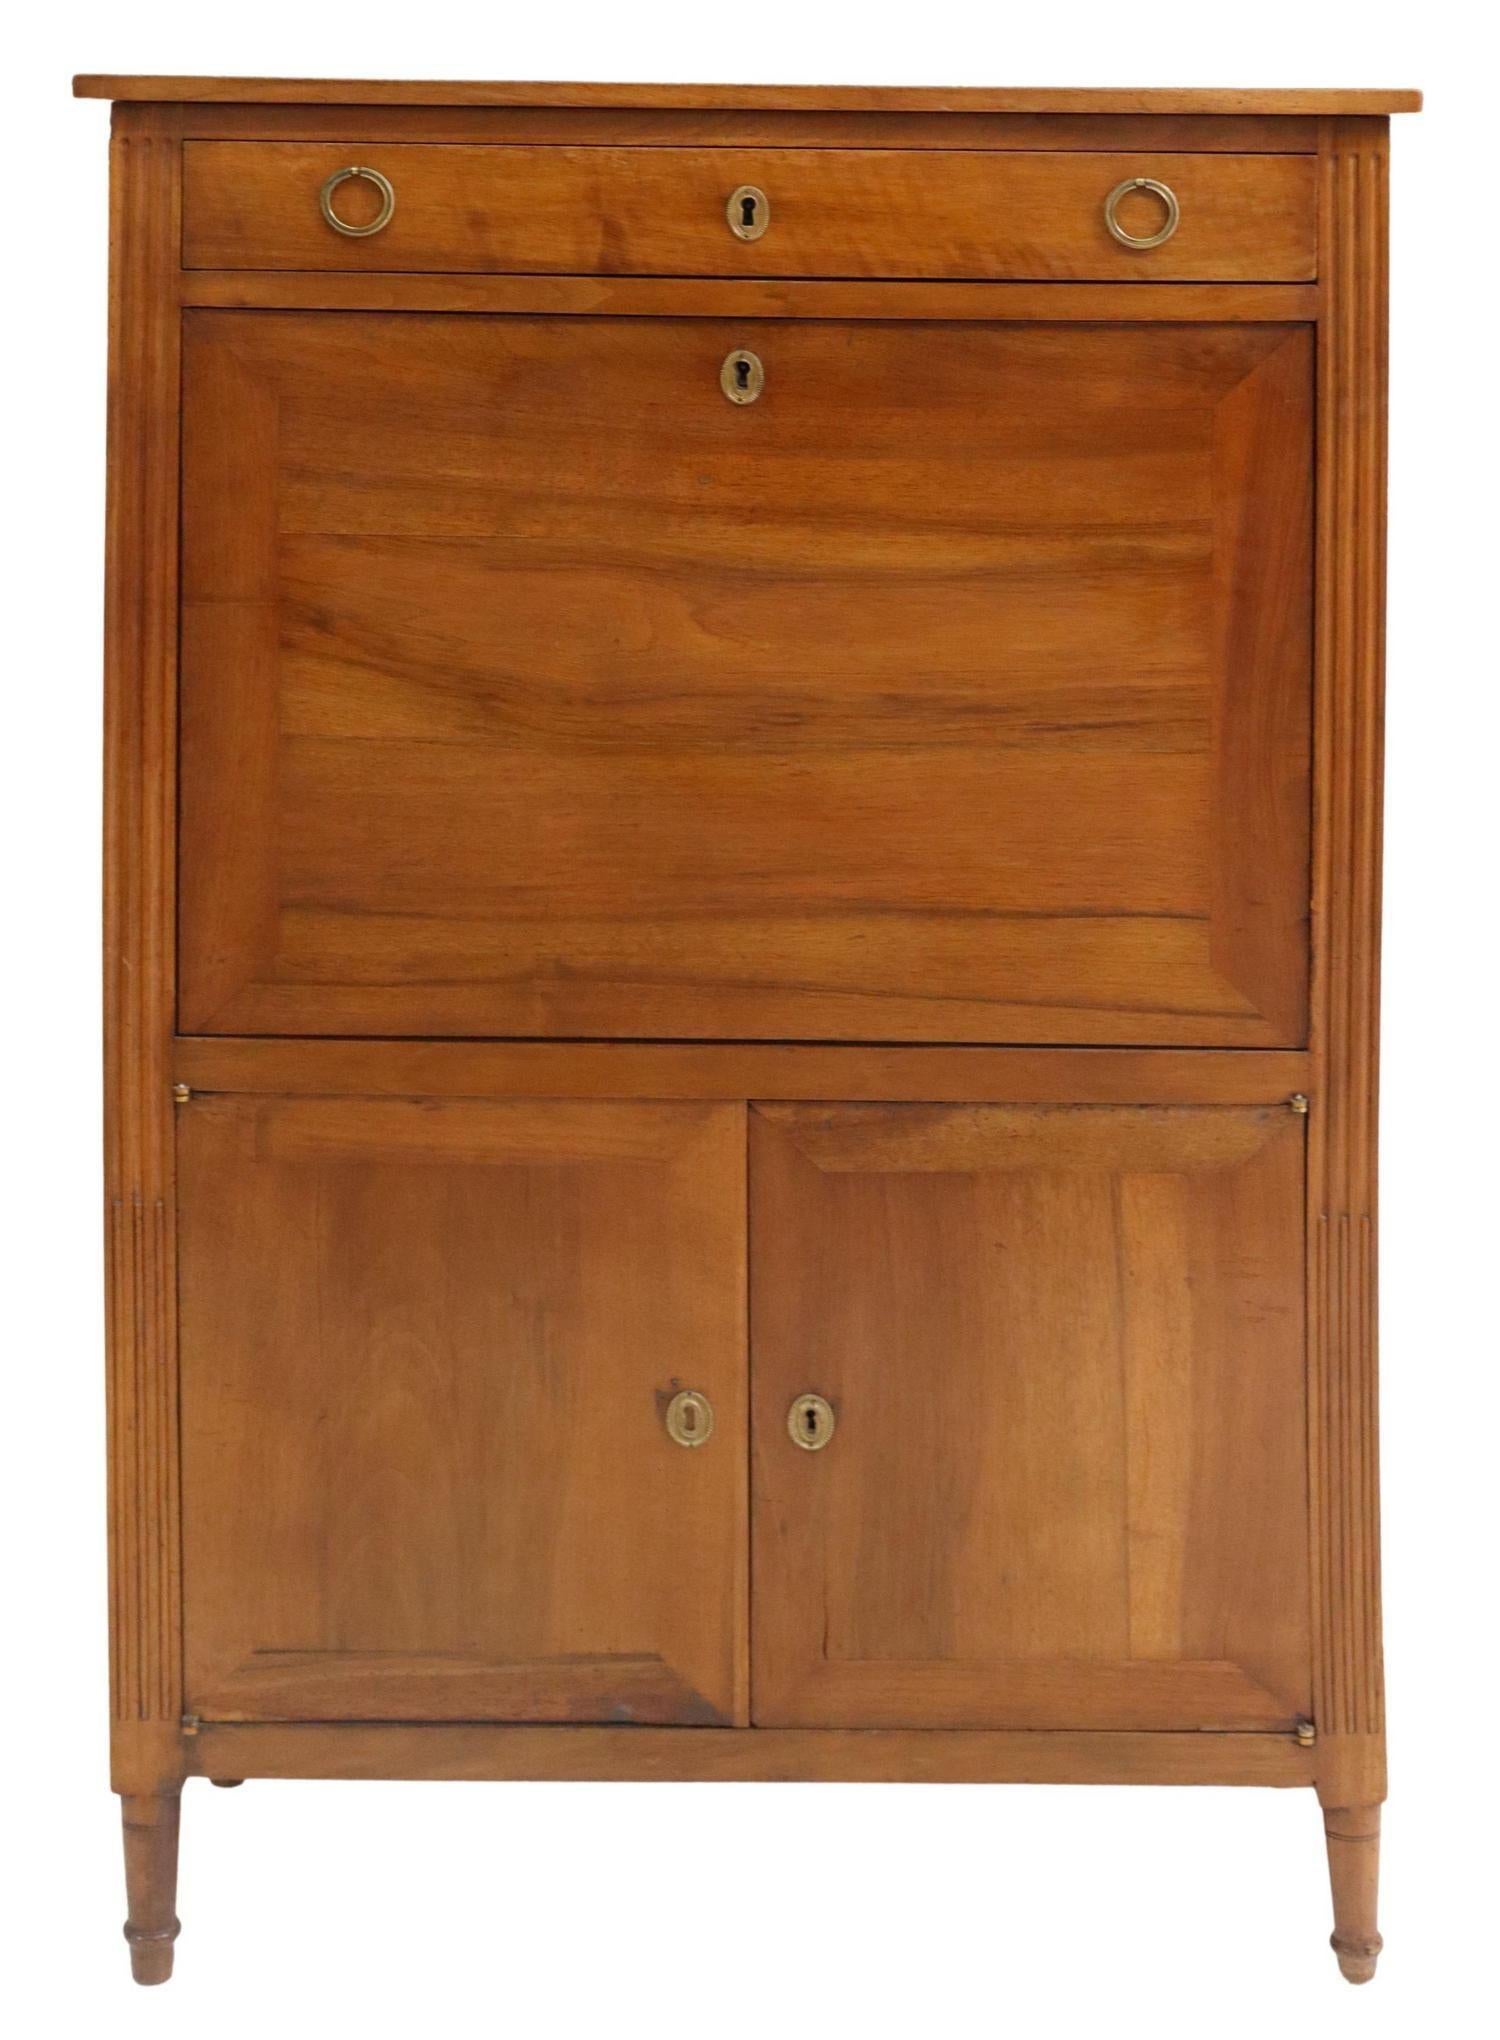 French Louis XVI style fall front desk, early 20th c. This Secretaire desk features a single drawer over fall front panel, opening to fitted interior gallery, inset leather writing surface, lower double-door cabinet opening to shelf, rising on